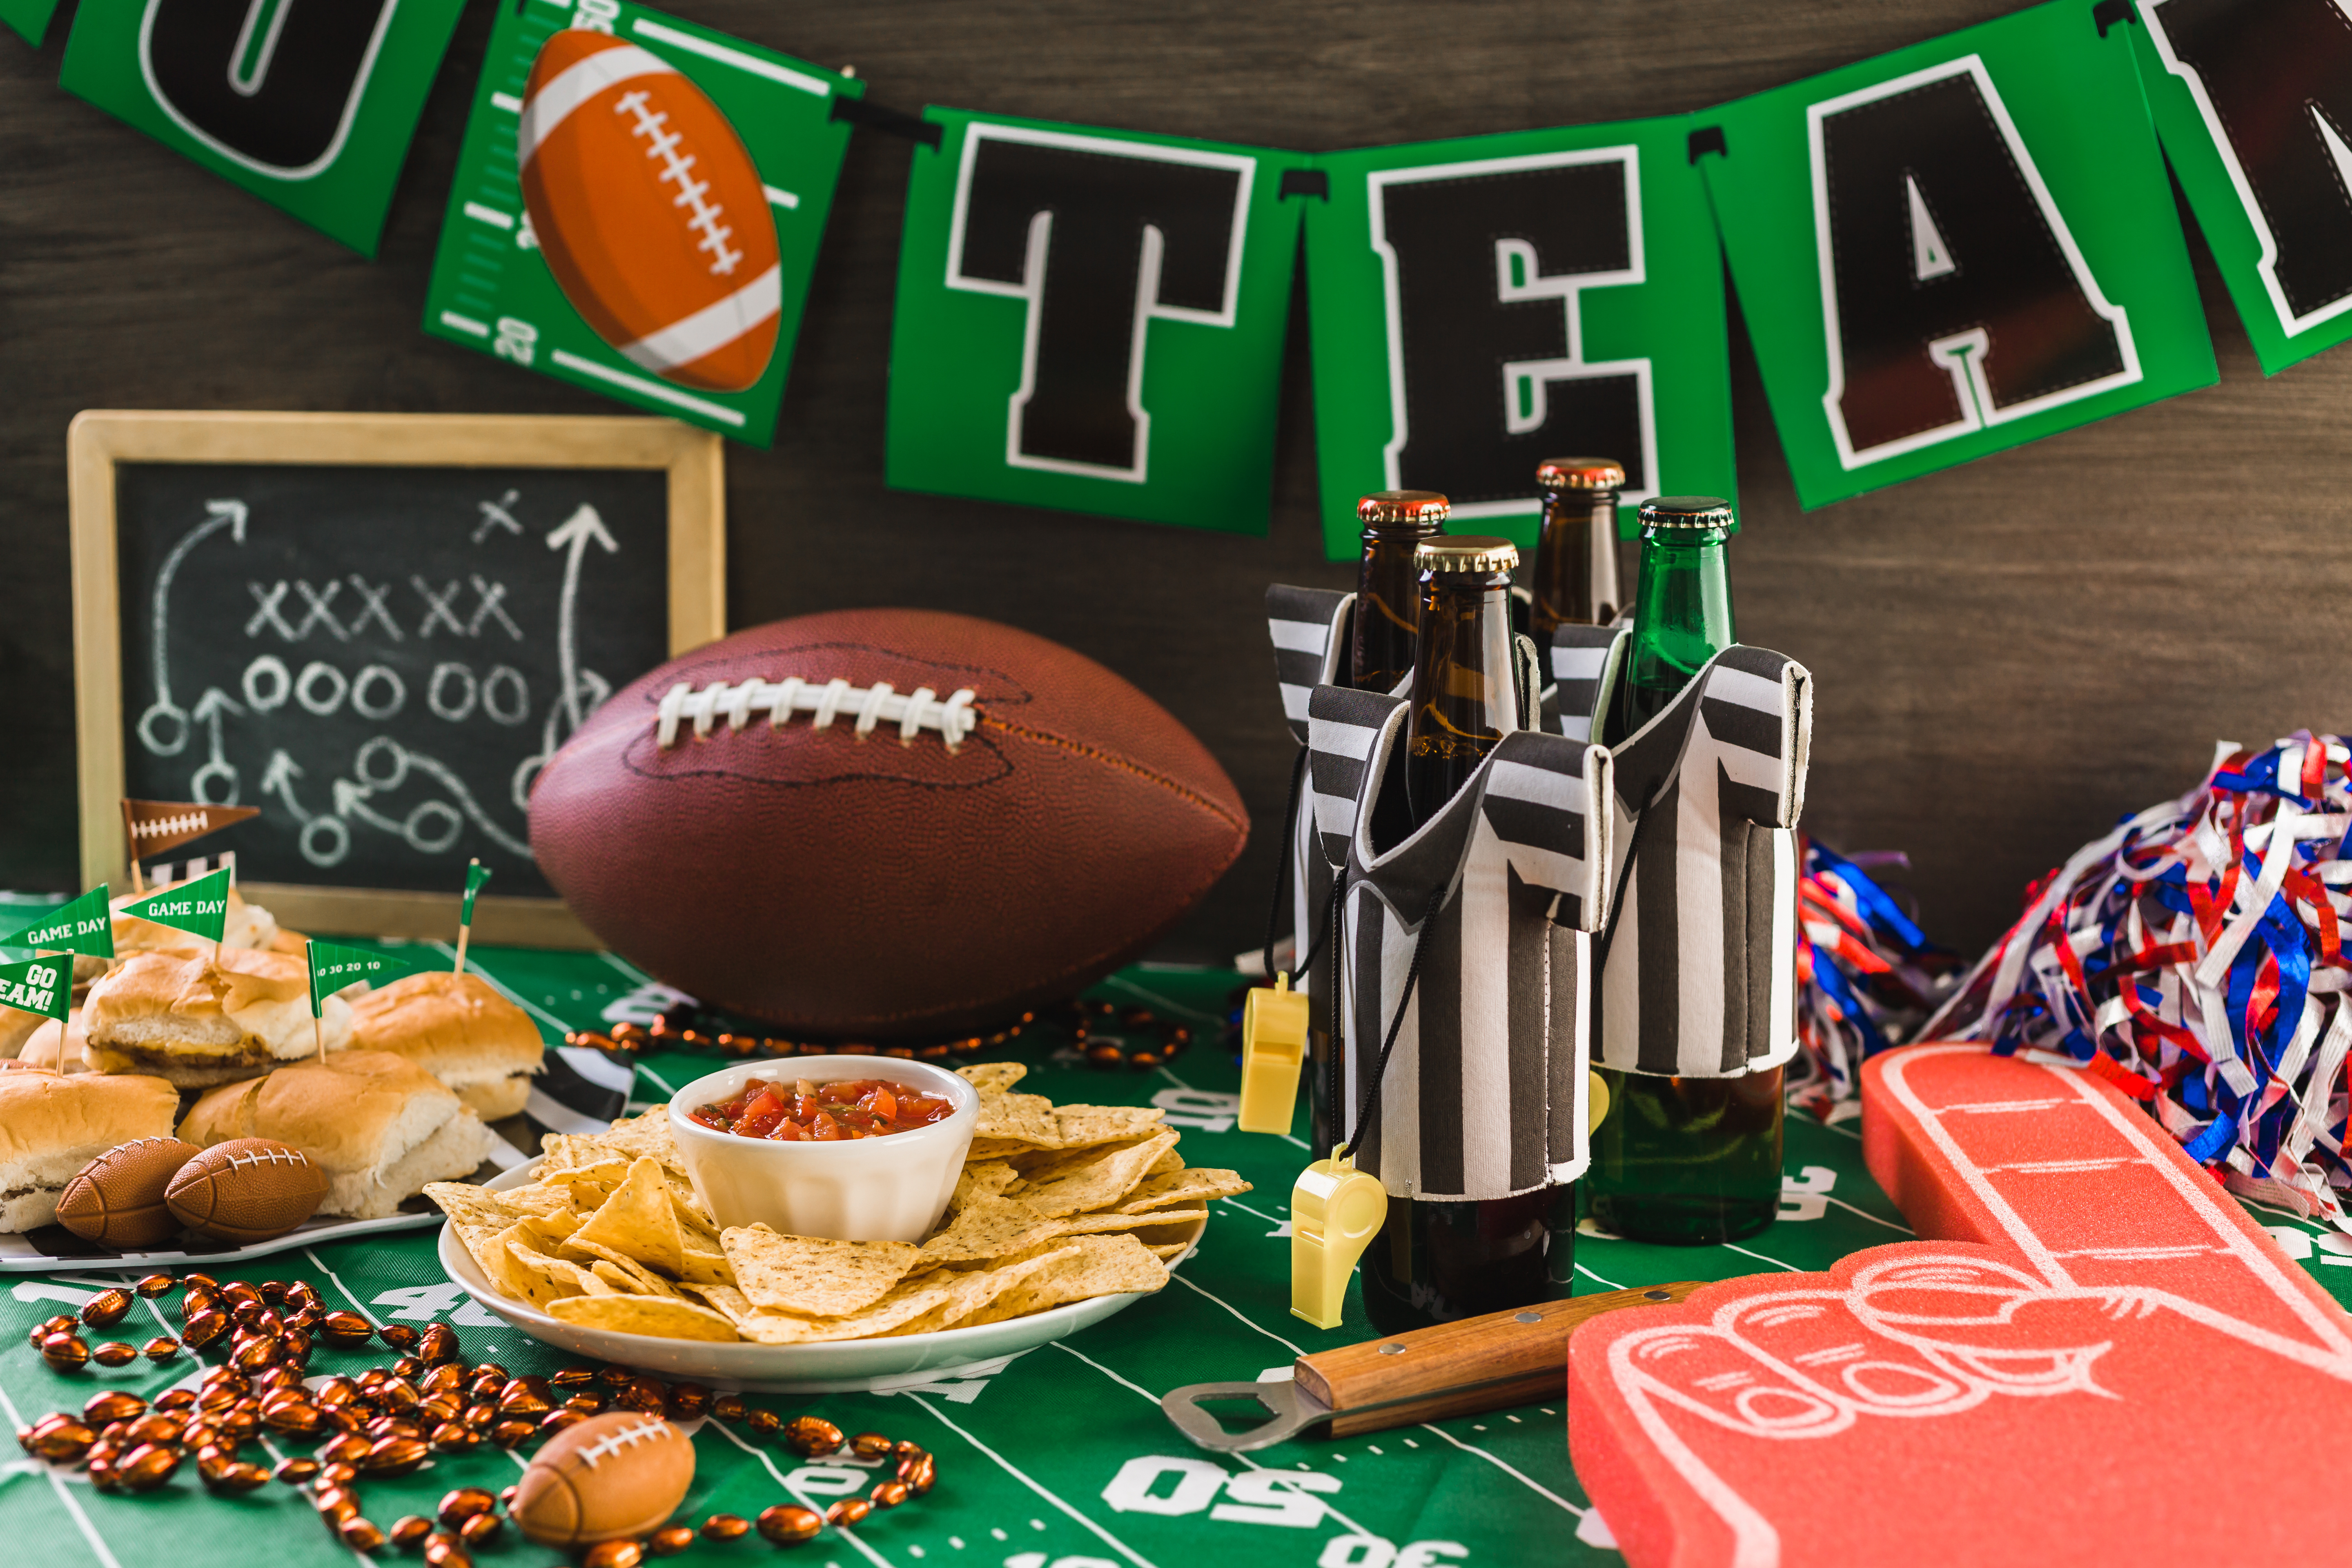 Game day football party table with beer, chips and salsa.